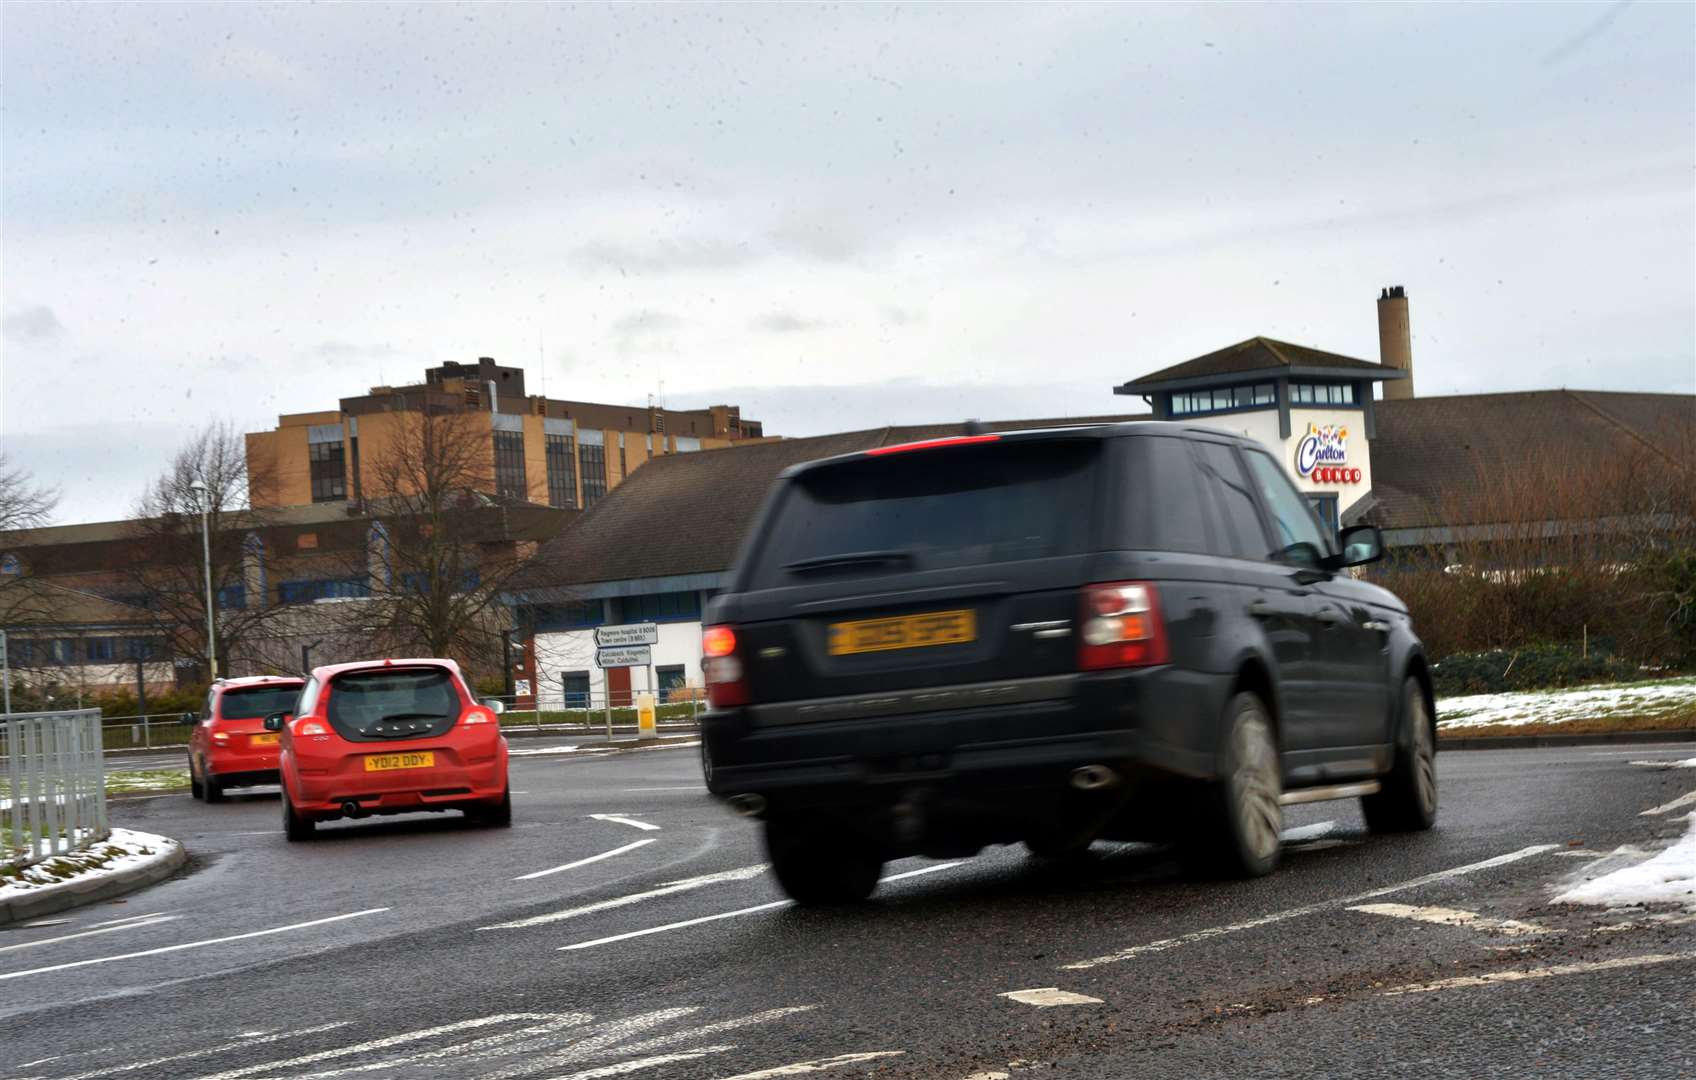 Plans to ease congestion at Inshes roundabout in Inverness are moving forward.